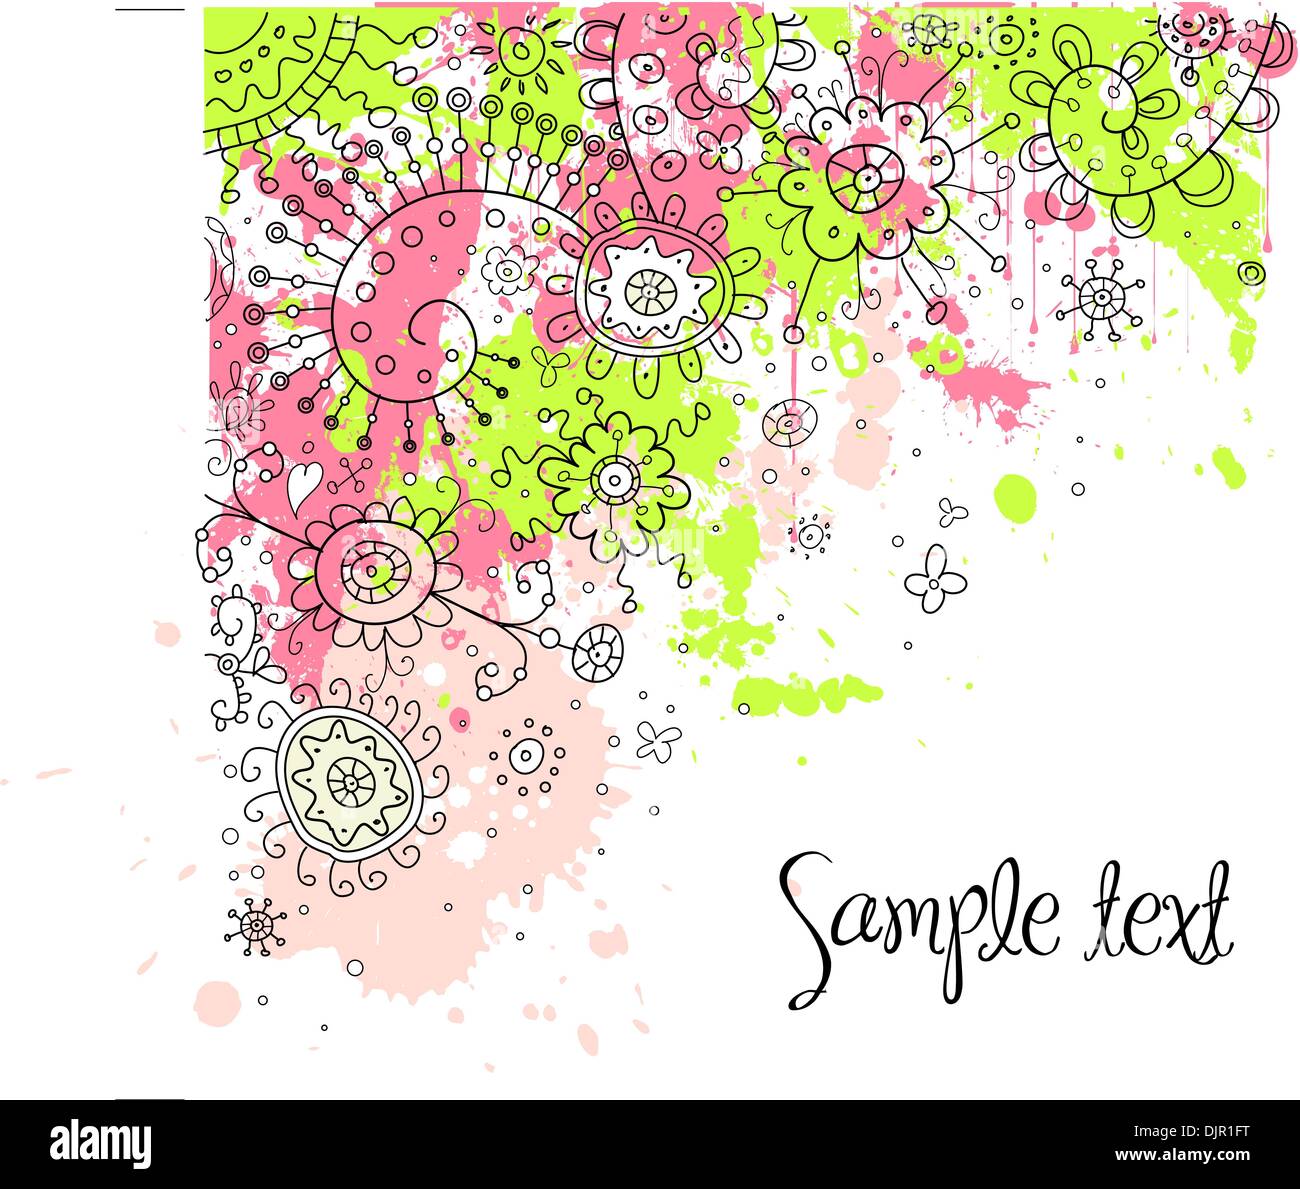 Hand-Drawn Abstract Doodles and Flowers Vector Illustration Stock Vector